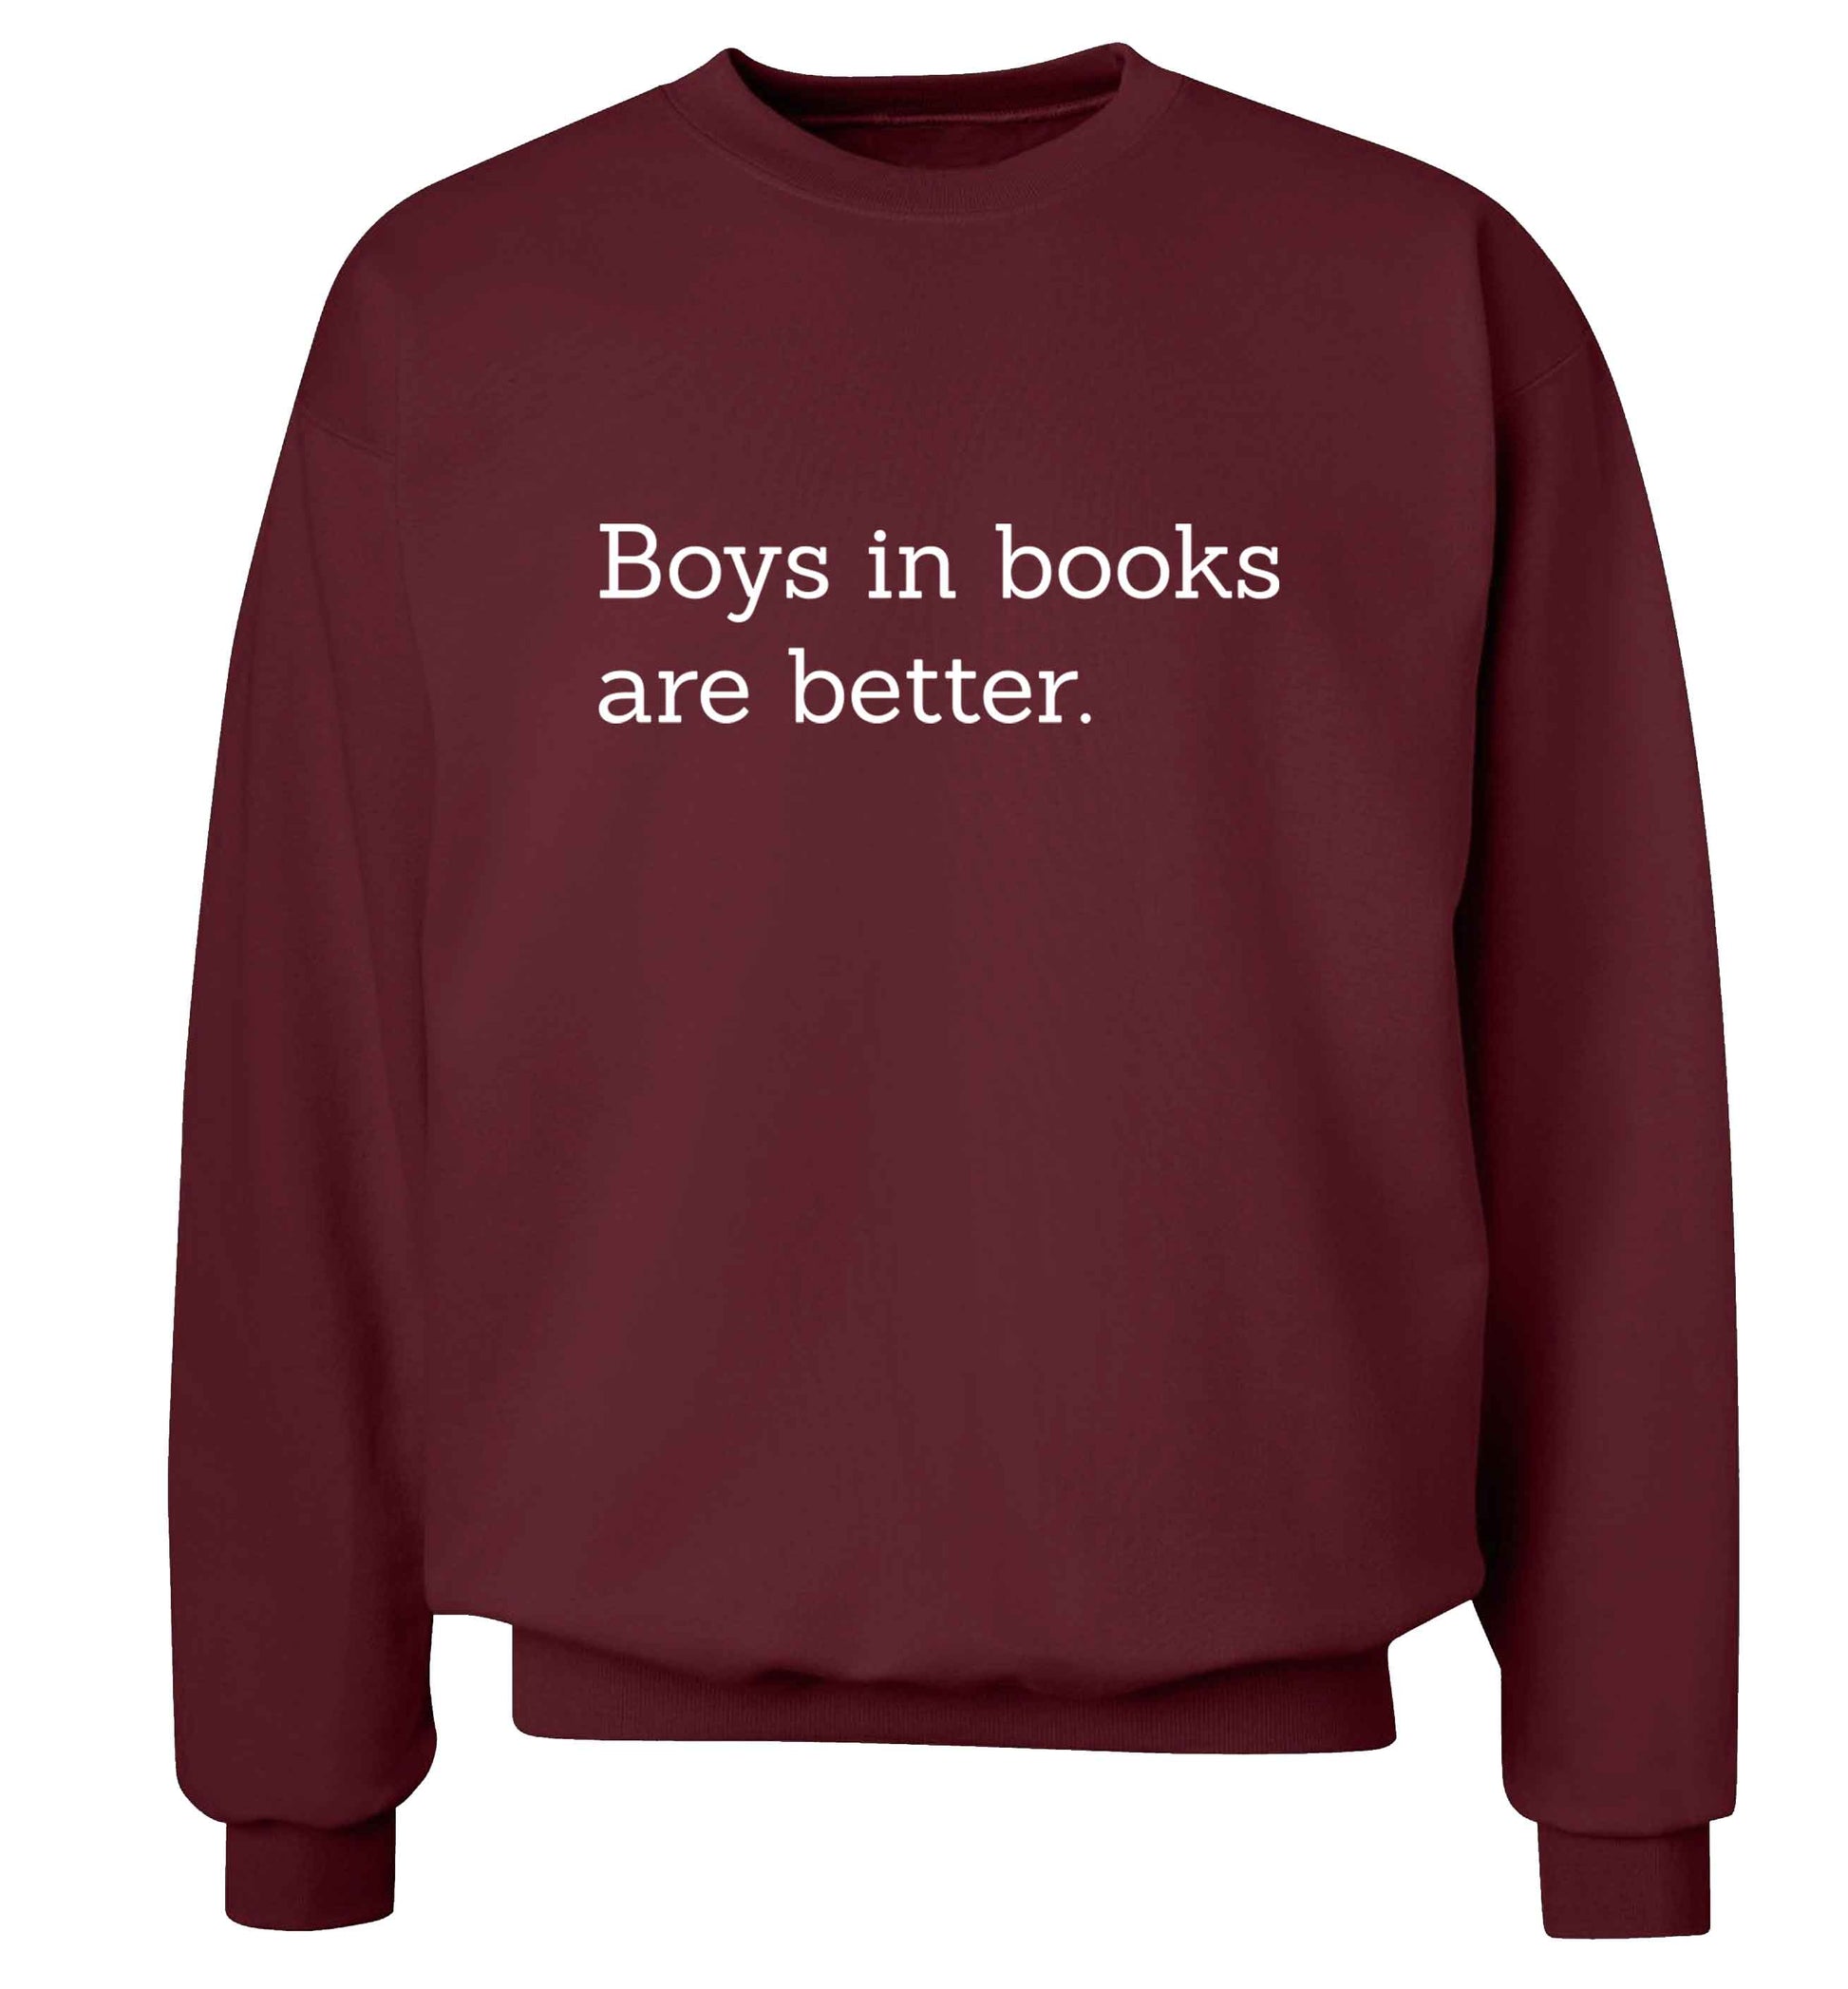 Boys in books are better adult's unisex maroon sweater 2XL